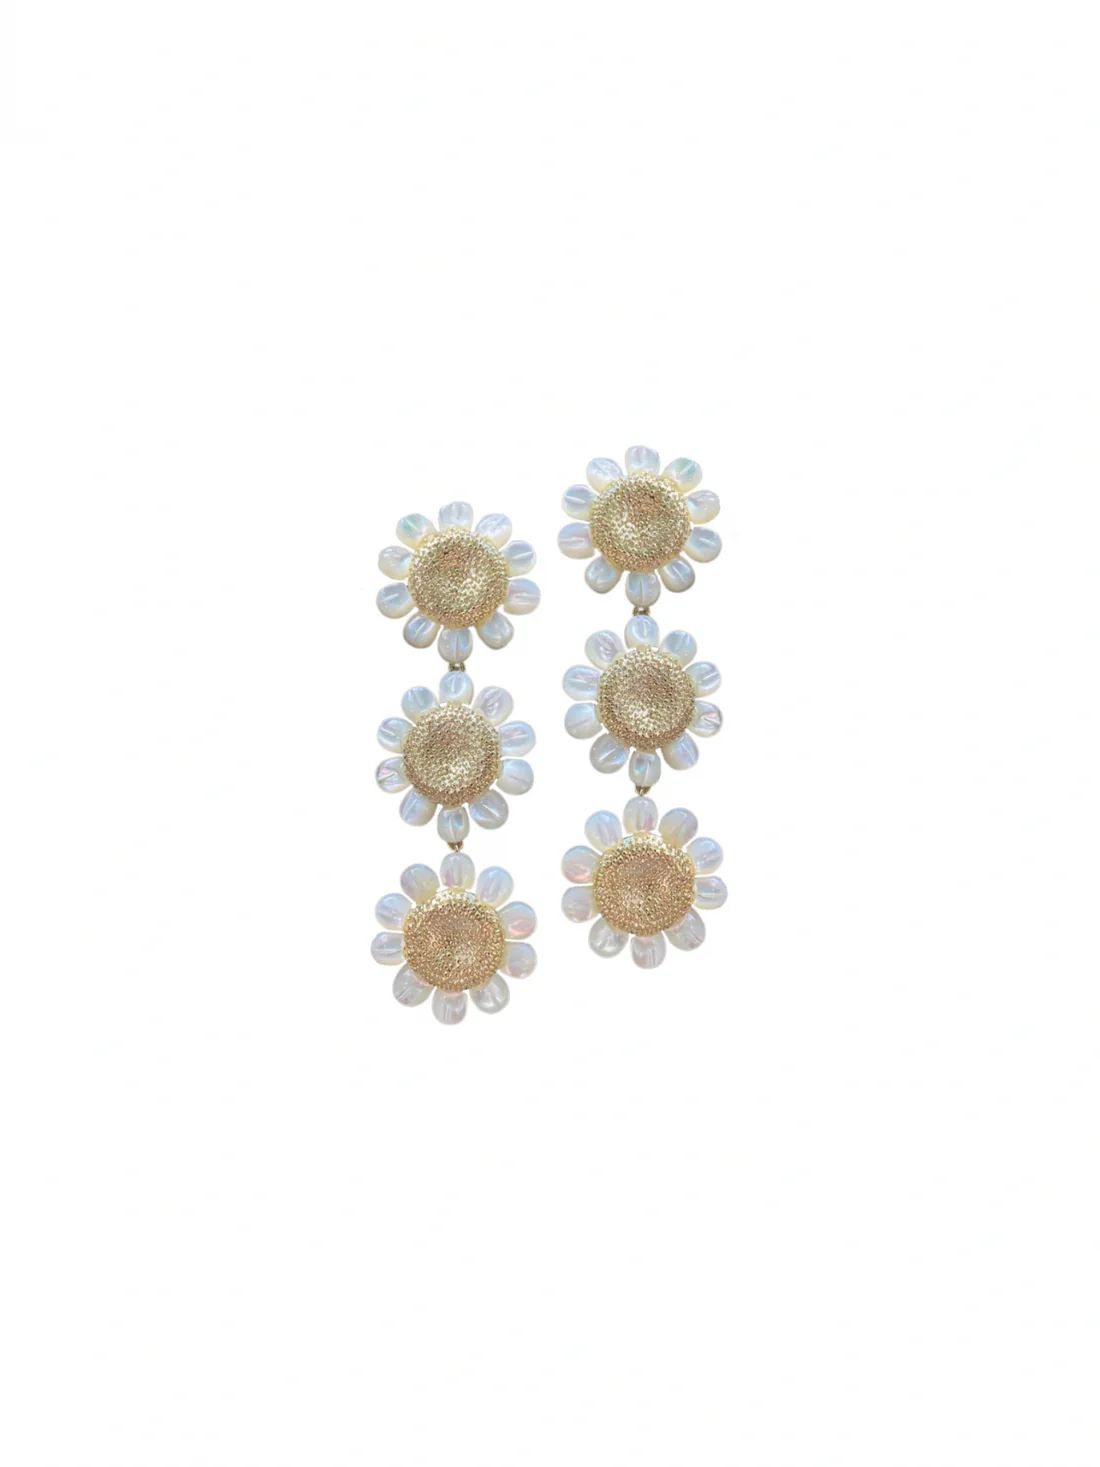 garden collection: mother of pearl + golden daisy | Nicola Bathie Jewelry